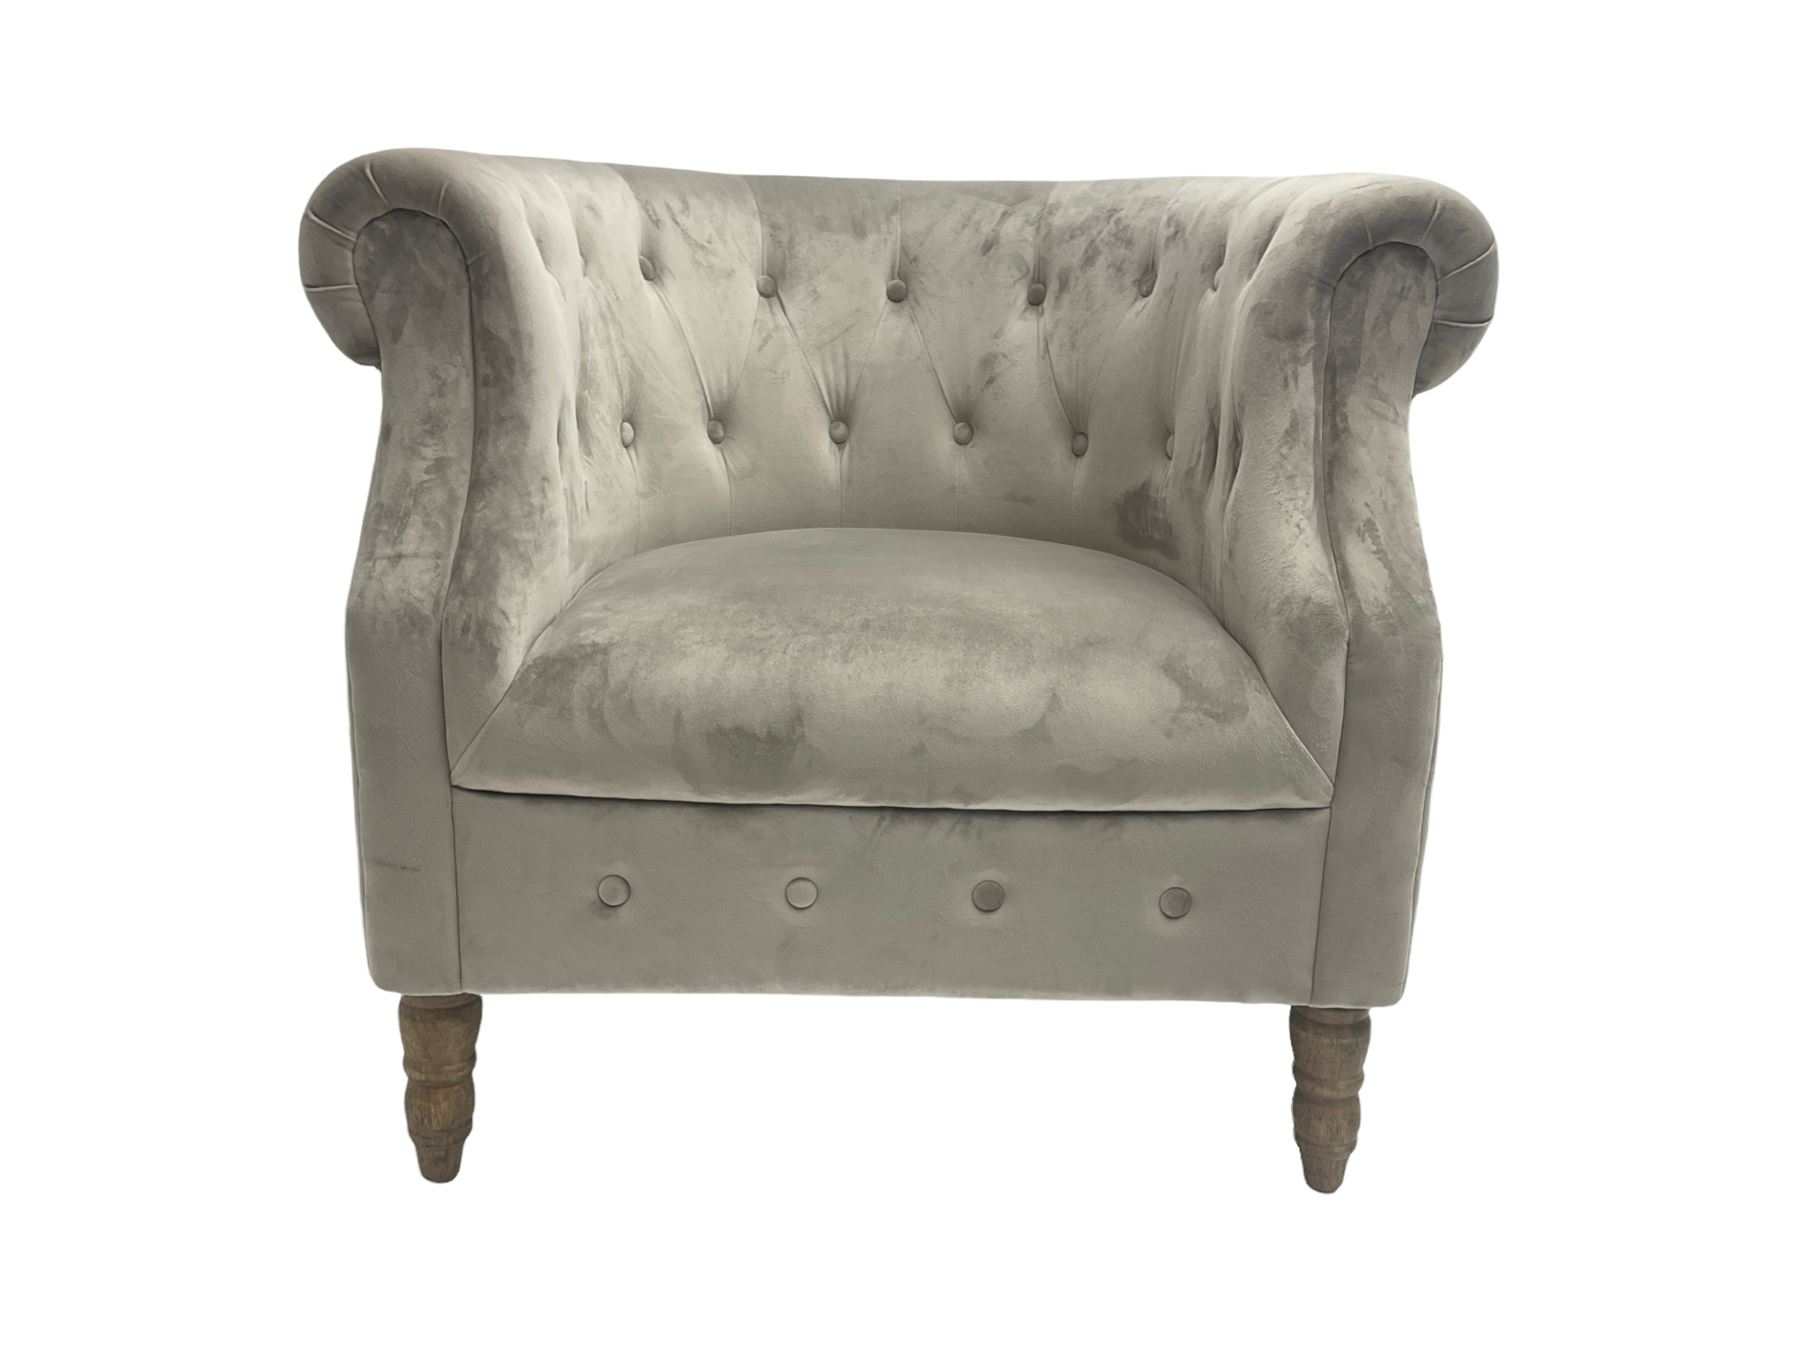 Grey velvet Chesterfield button pressed tub chair with rolled arms